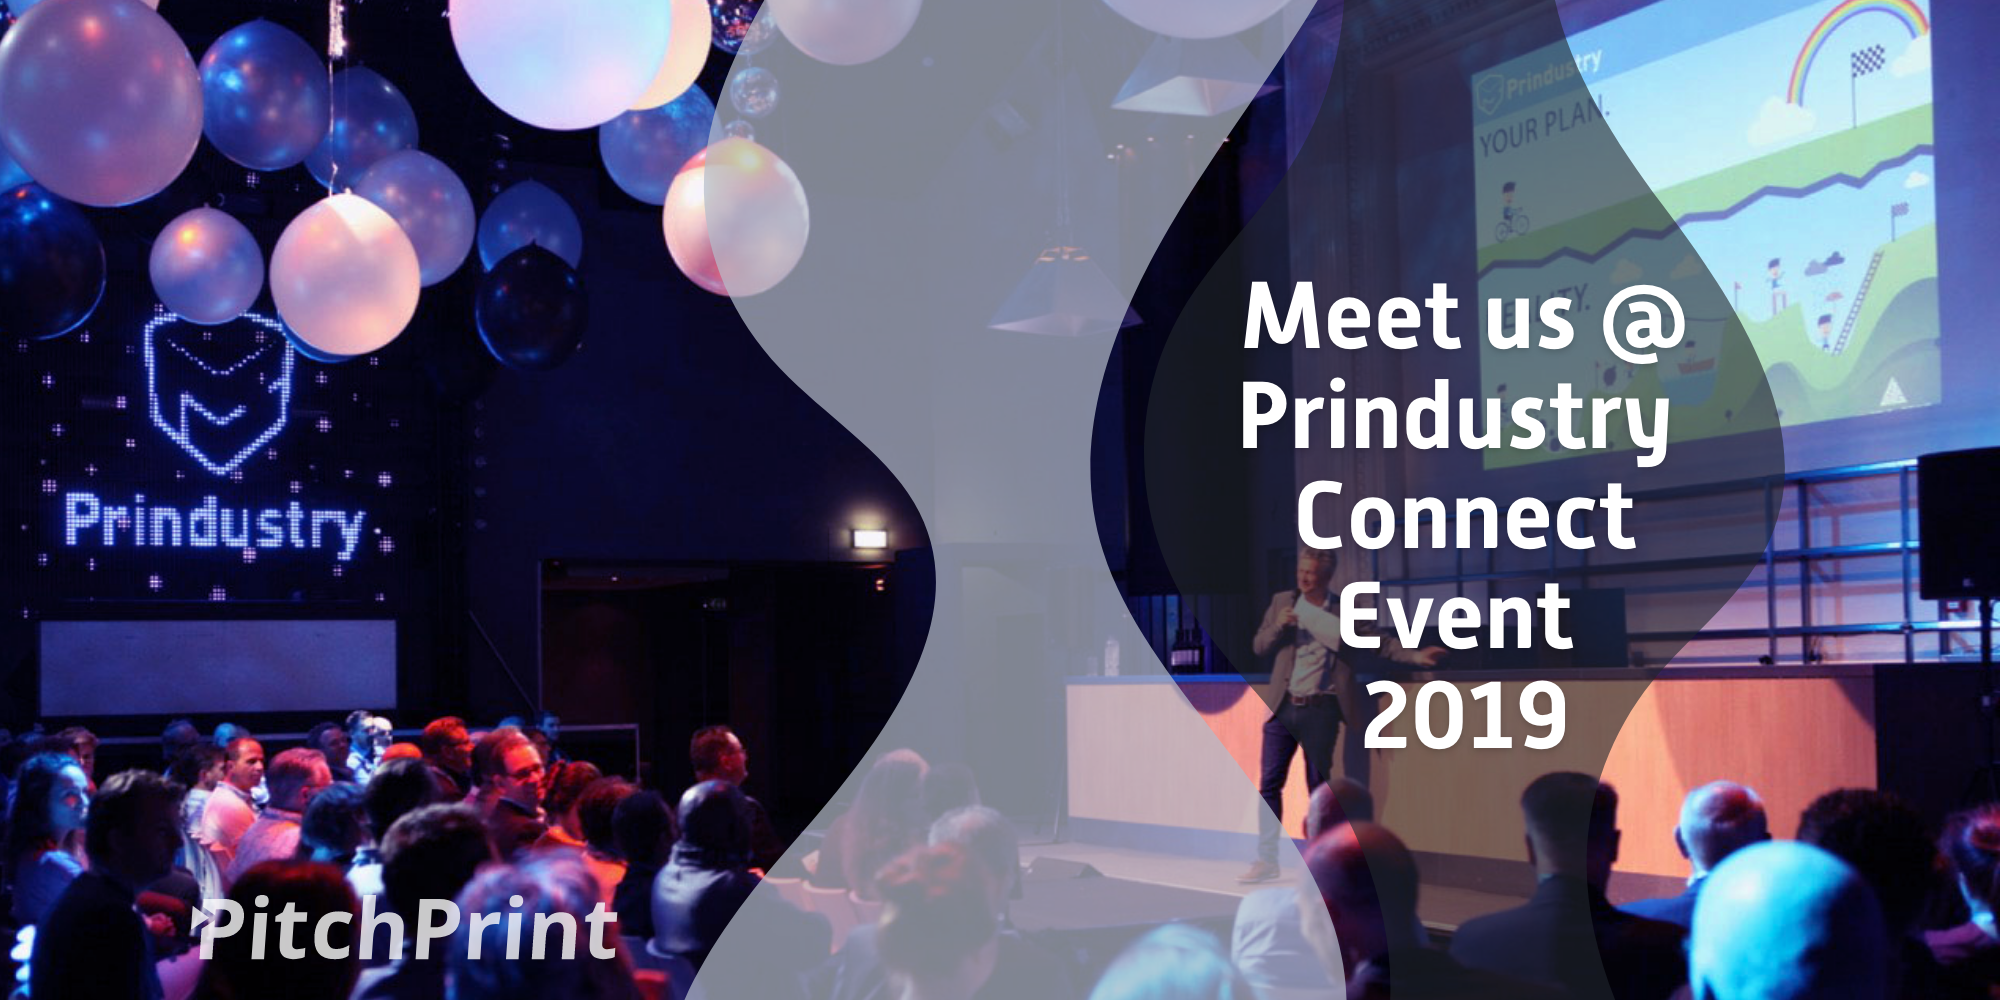 PitchPrint @ Prindustry Connect Event 2019